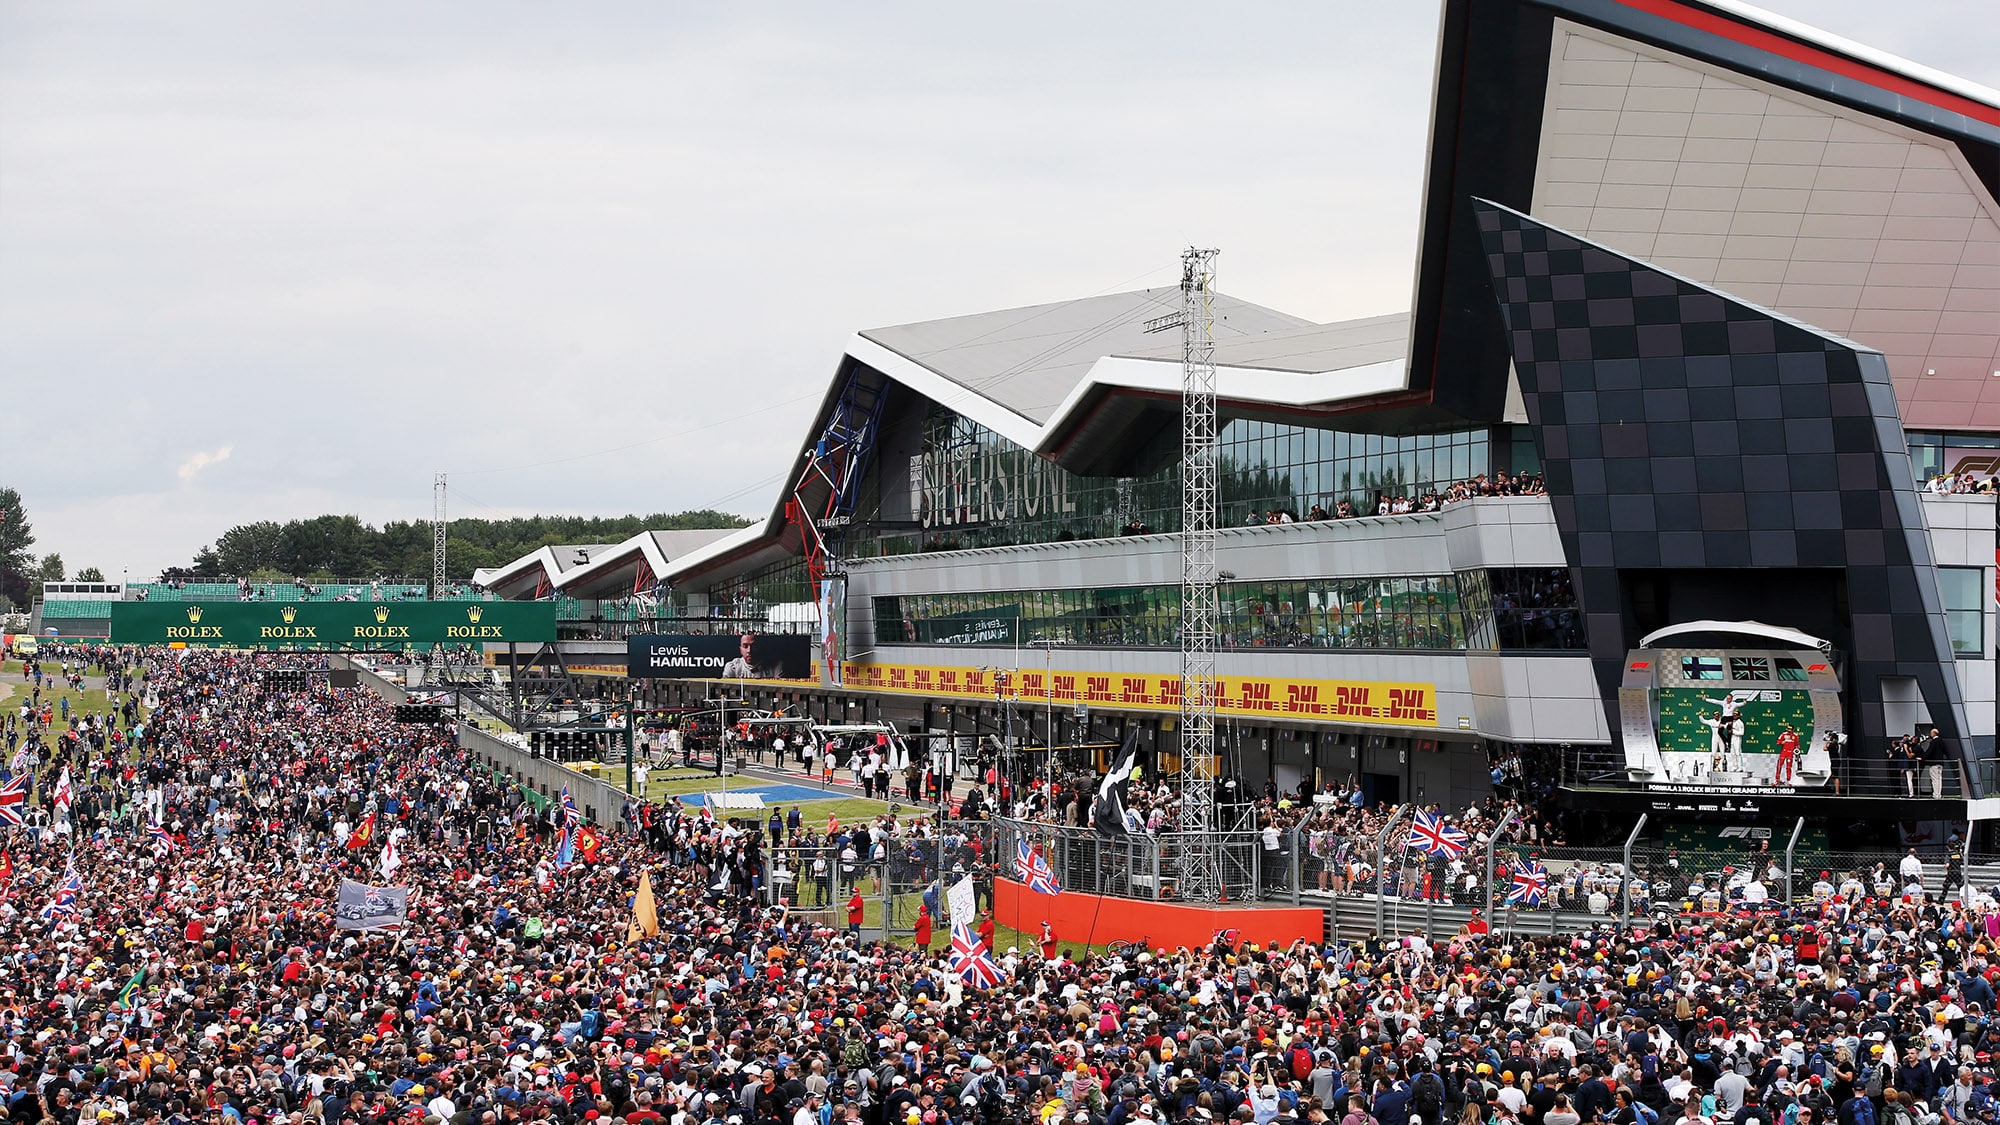 Crowds on the Silverstone circuit at the end of the British Grand Prix